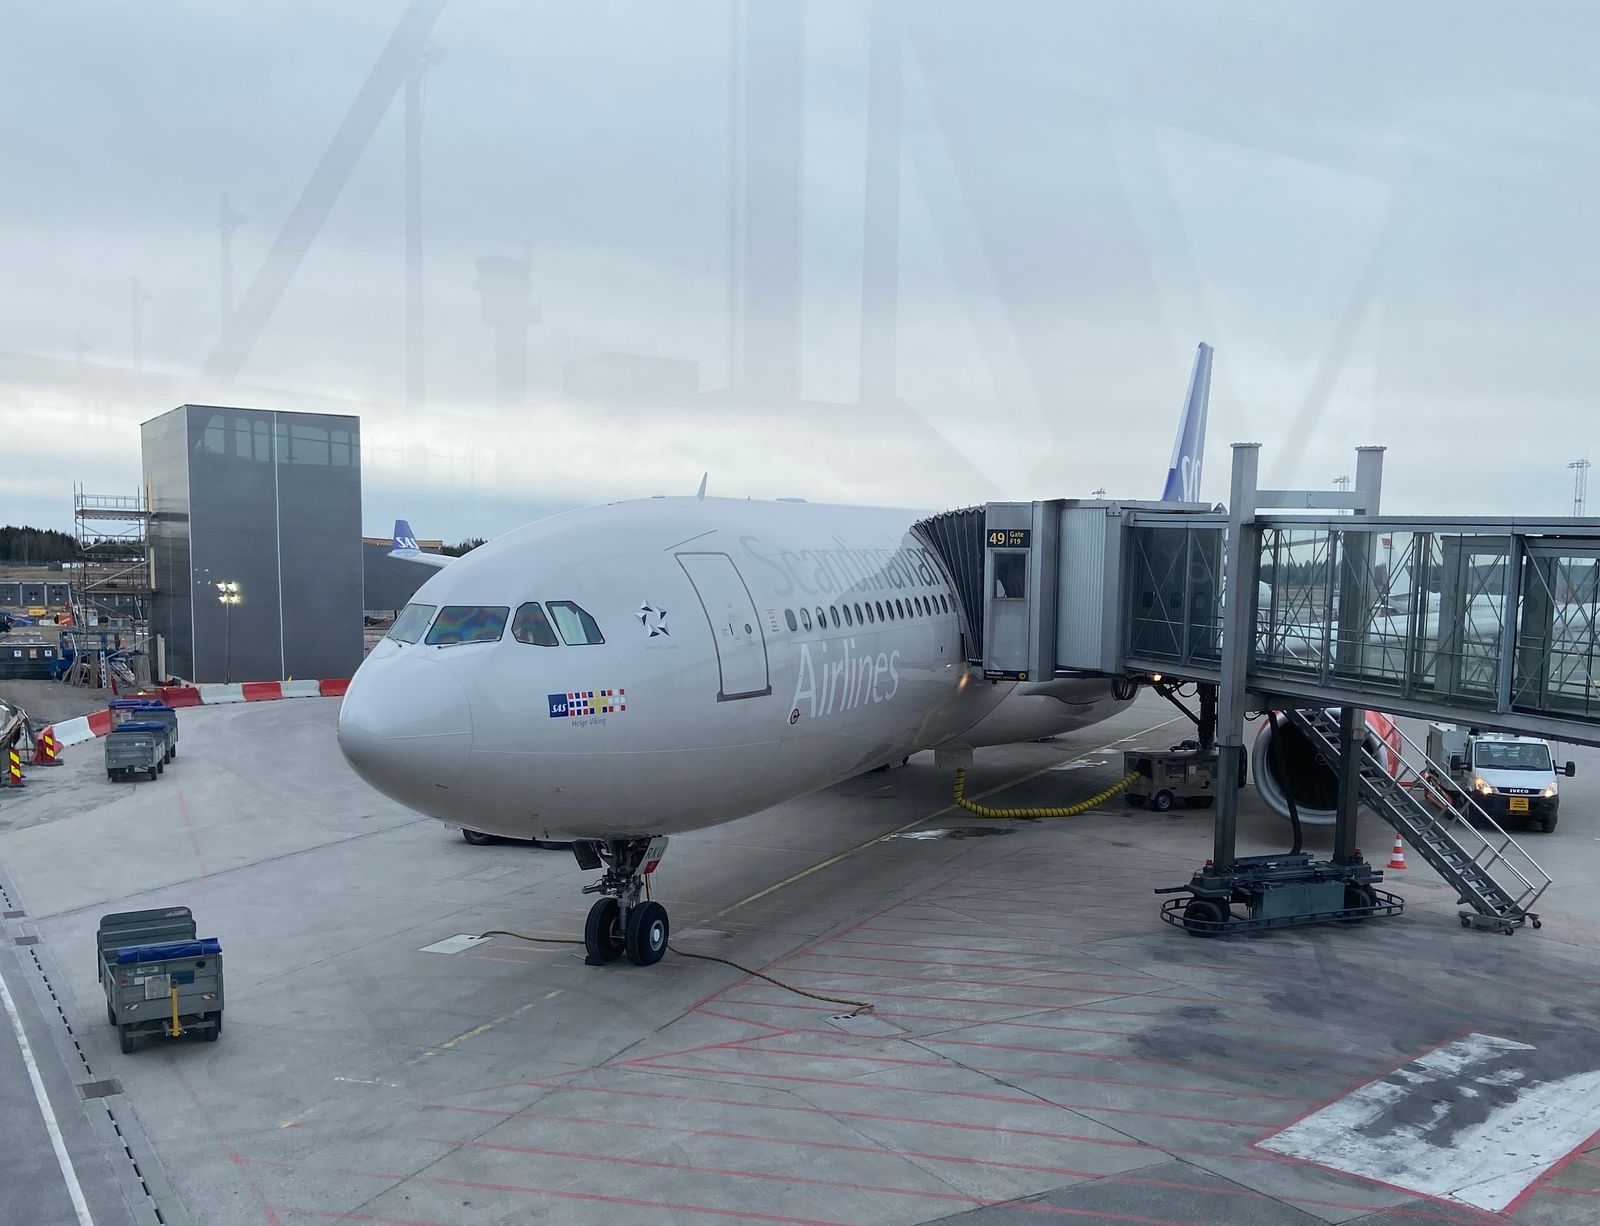 Cover image for Review of SAS Business Class Oslo to Miami